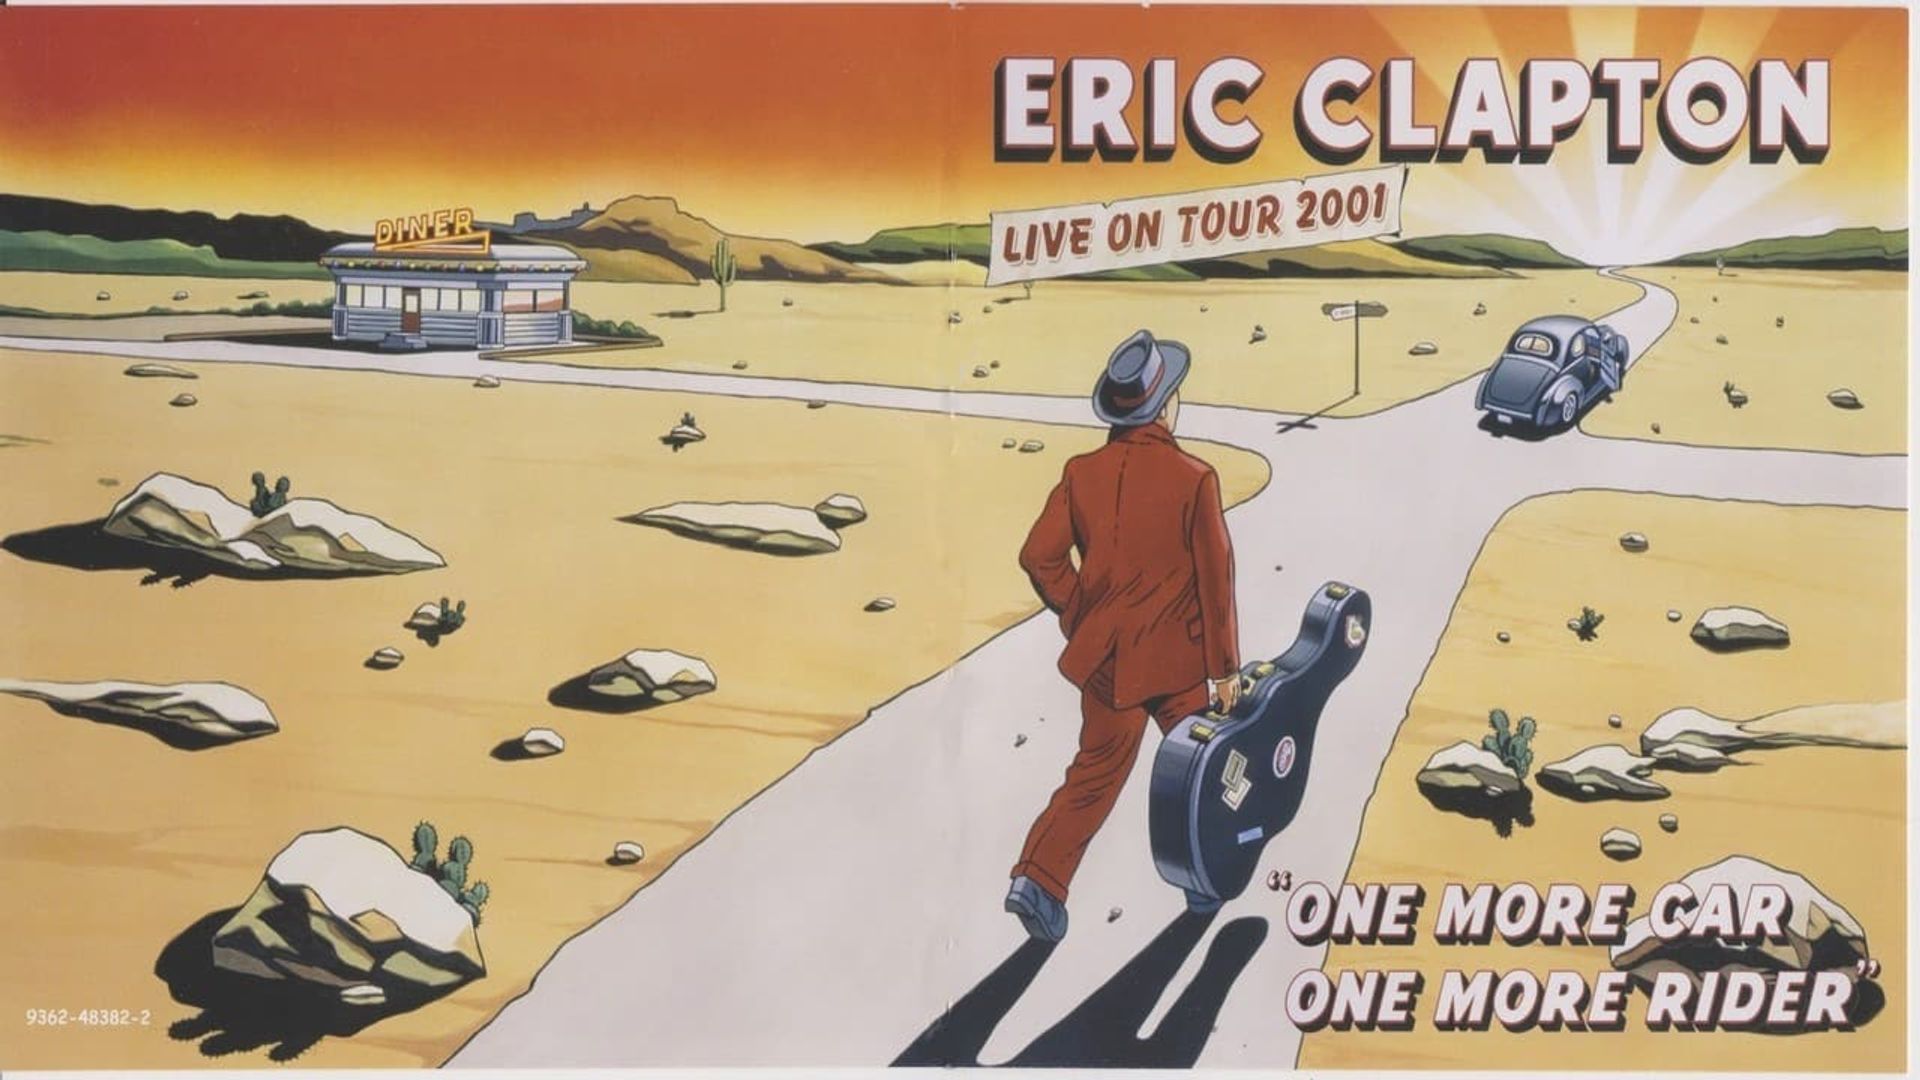 Eric Clapton: One More Car, One More Rider - Live on Tour 2001 background